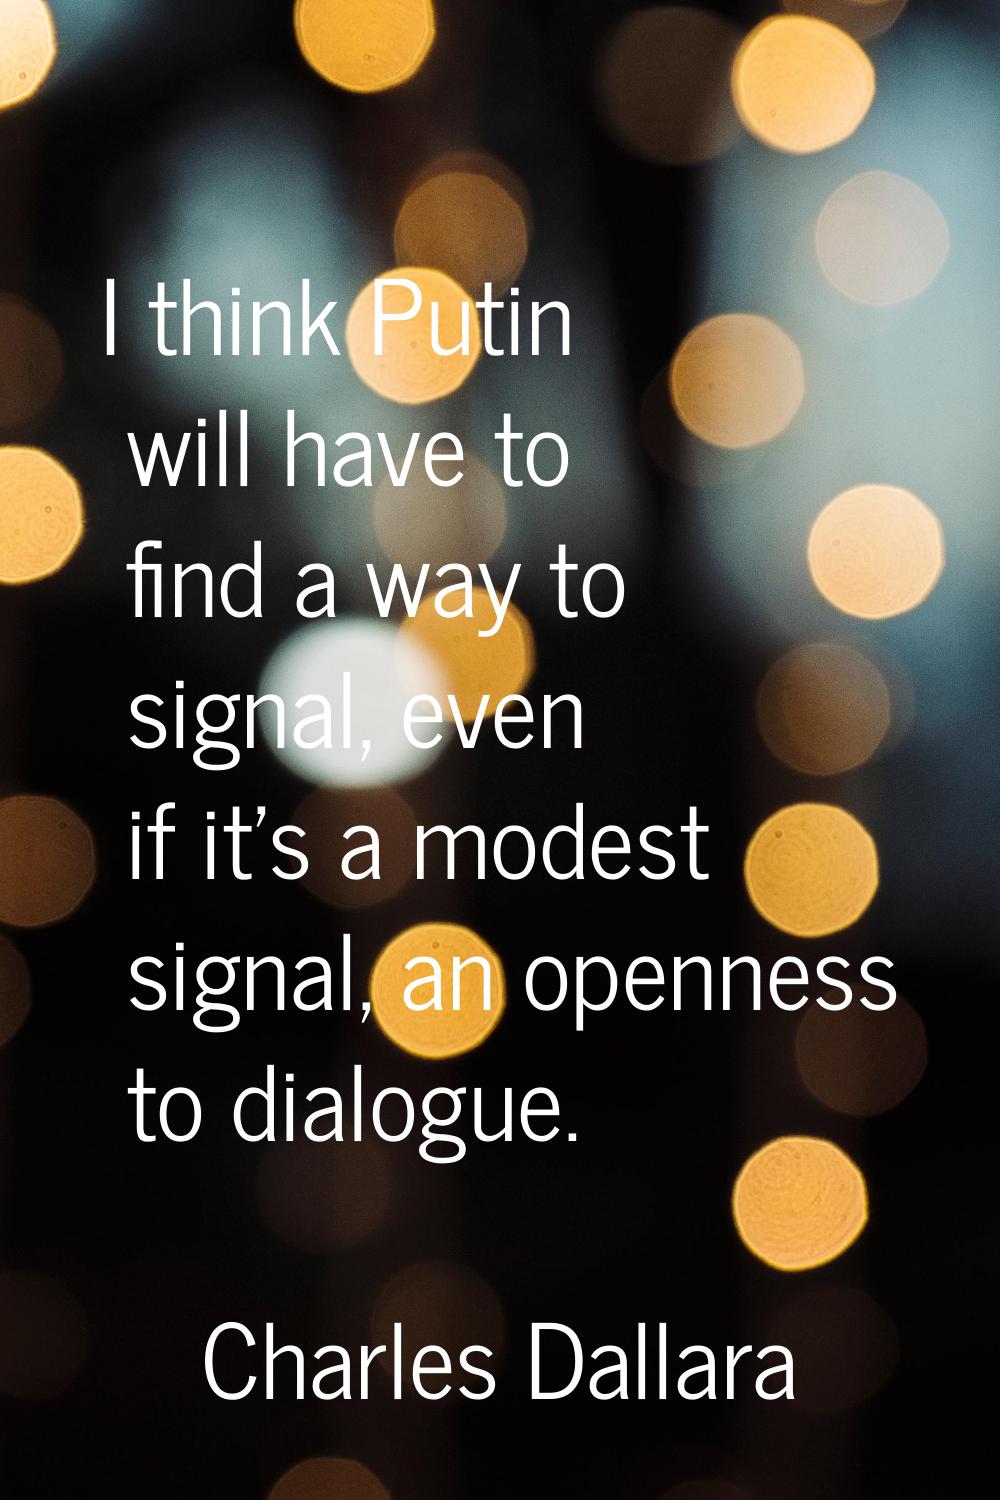 I think Putin will have to find a way to signal, even if it's a modest signal, an openness to dialo